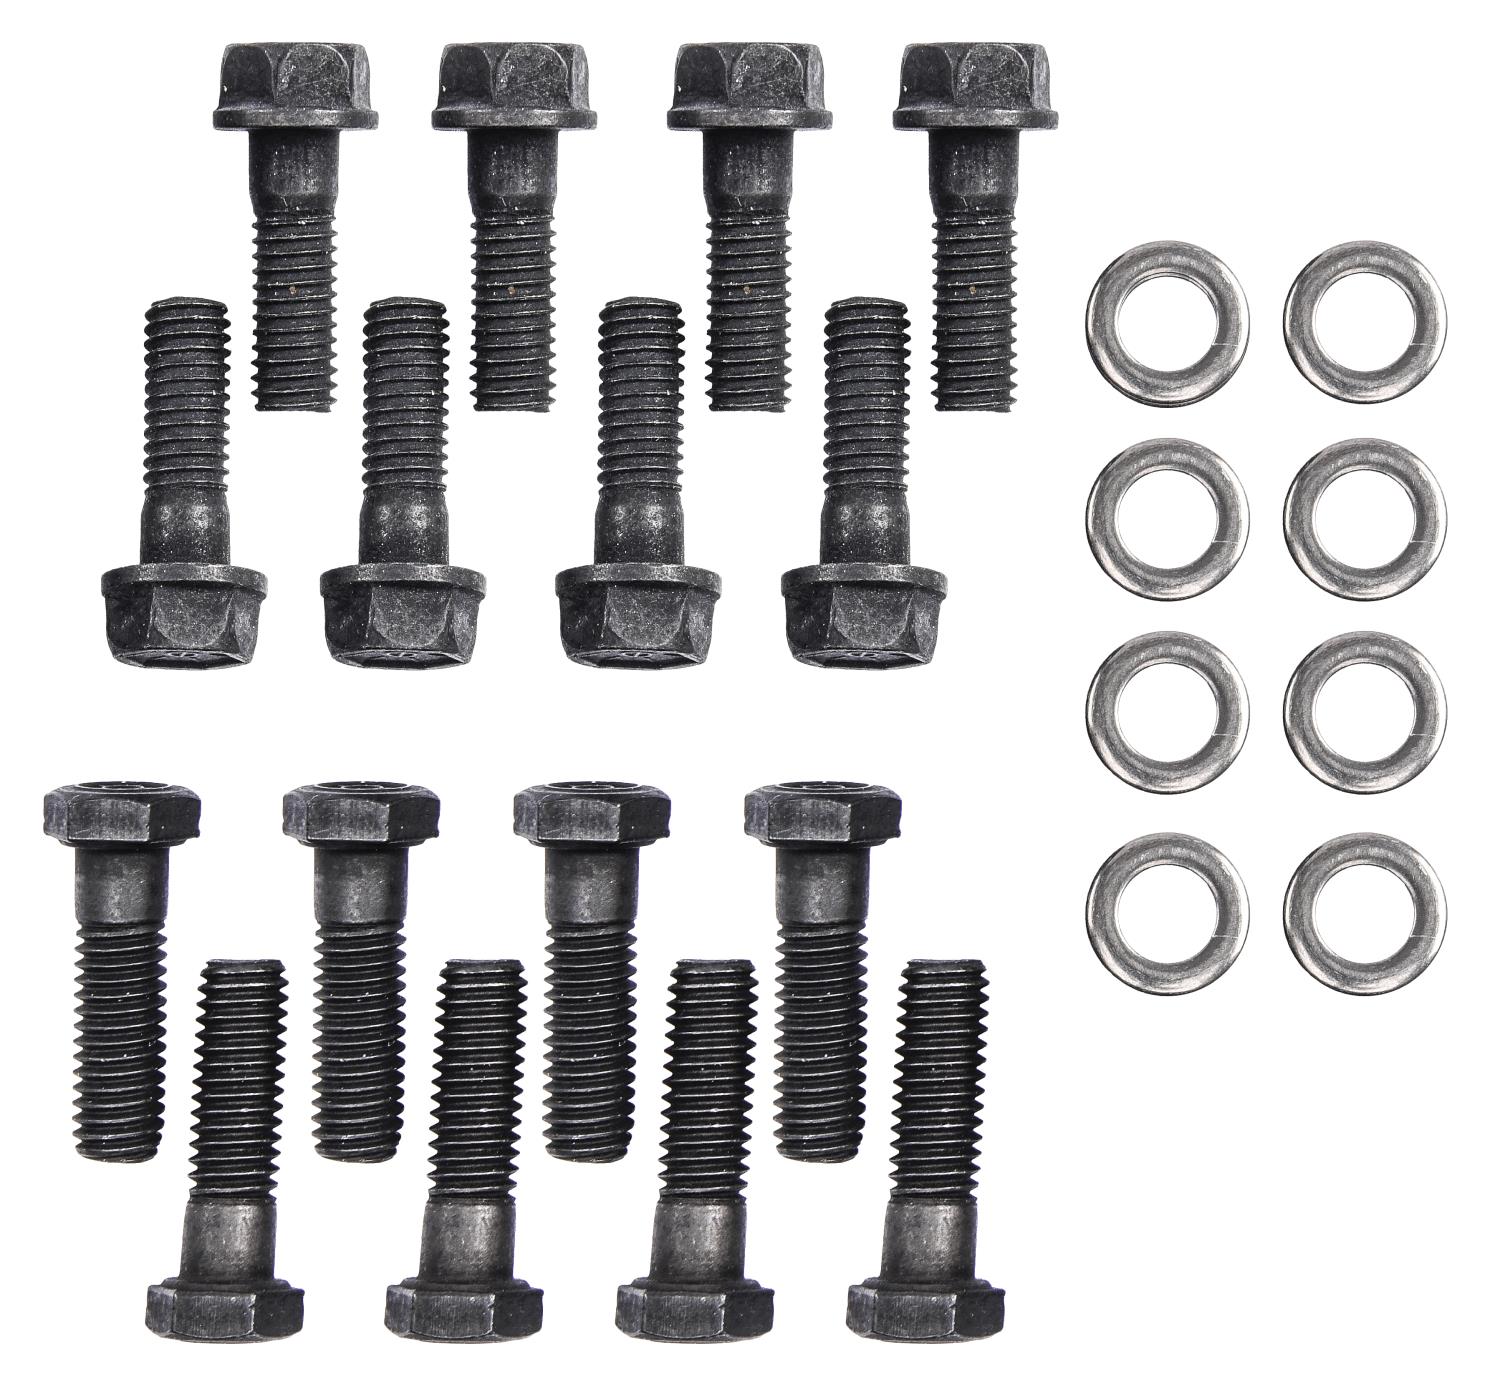 Exhaust Manifold Bolt Kit for 1969-1970 Big Block Chevrolet Engines